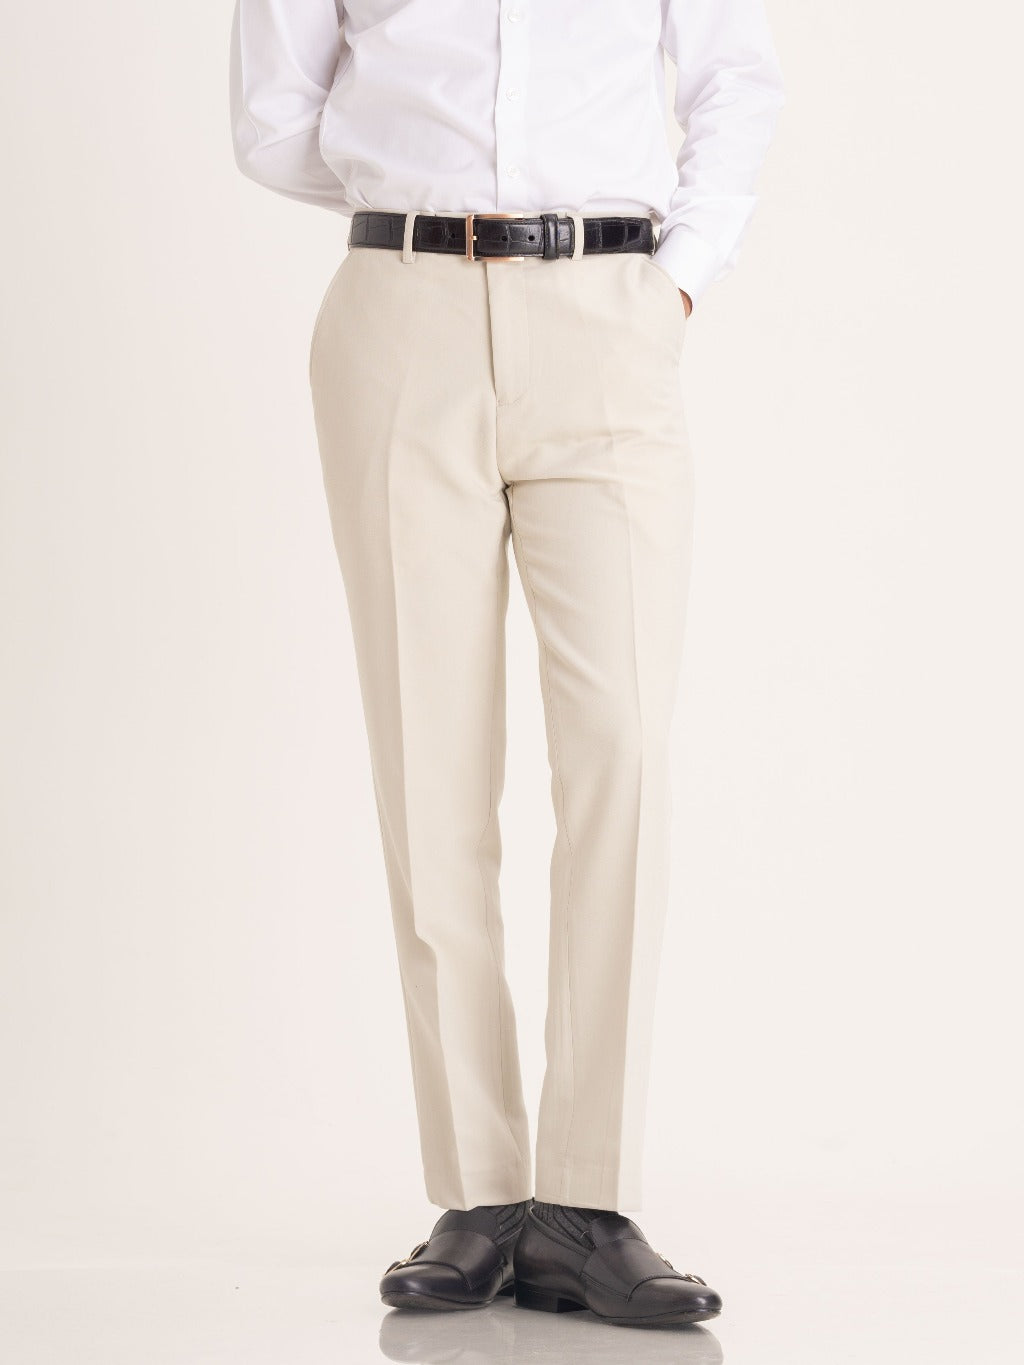 Trousers With Belt Loop - Sand White Plain (Stretchable) - Zeve Shoes